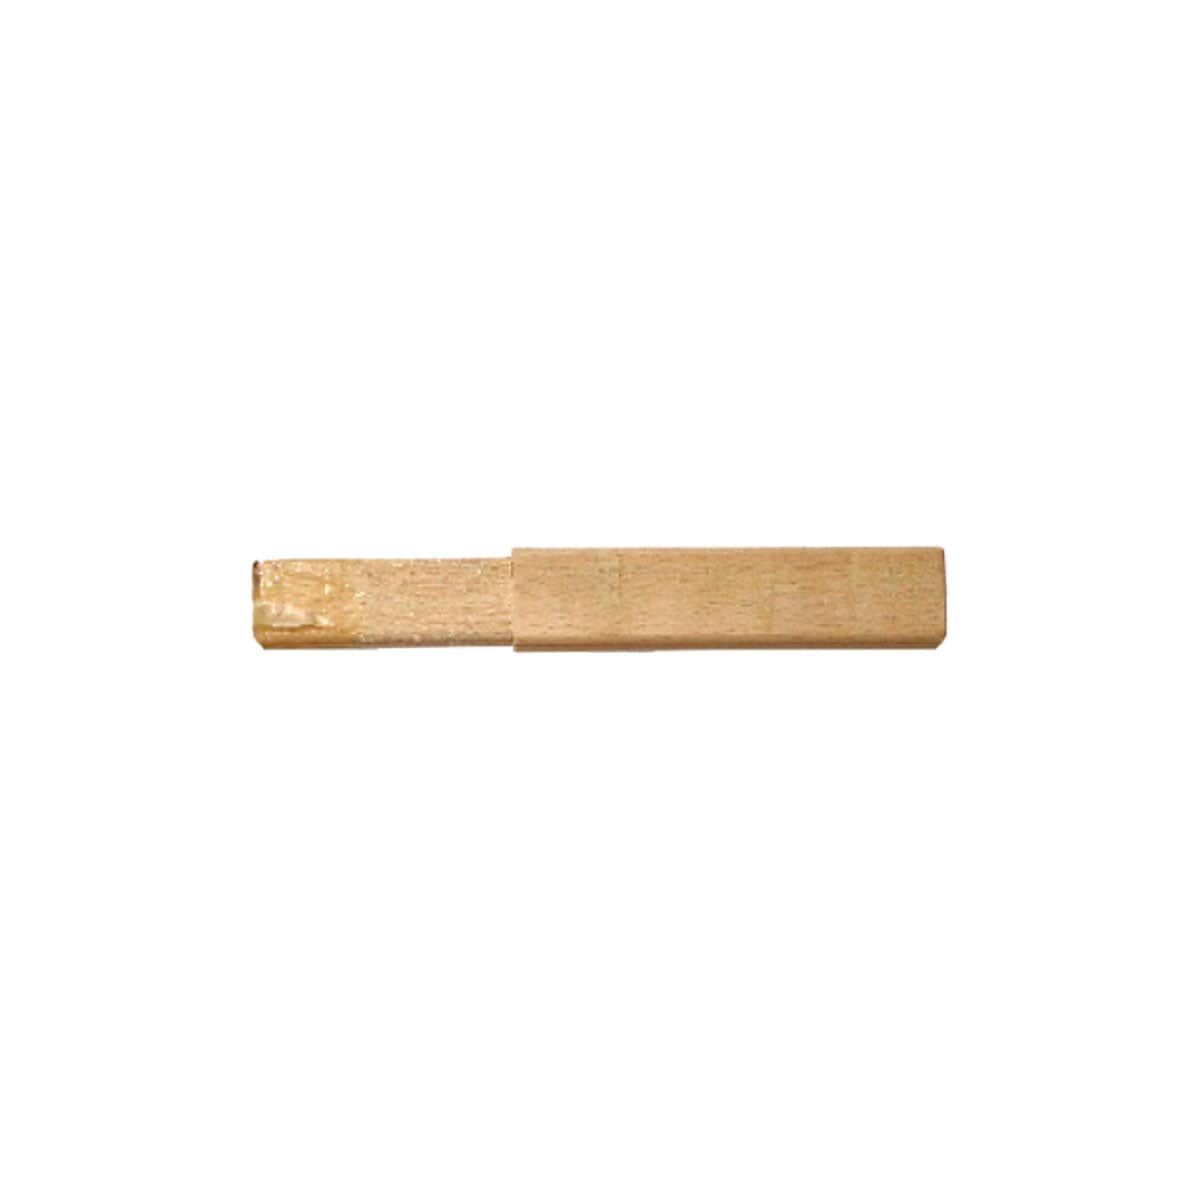 Blue Sports Junior Wood Butt End - 8" - The Hockey Shop Source For Sports